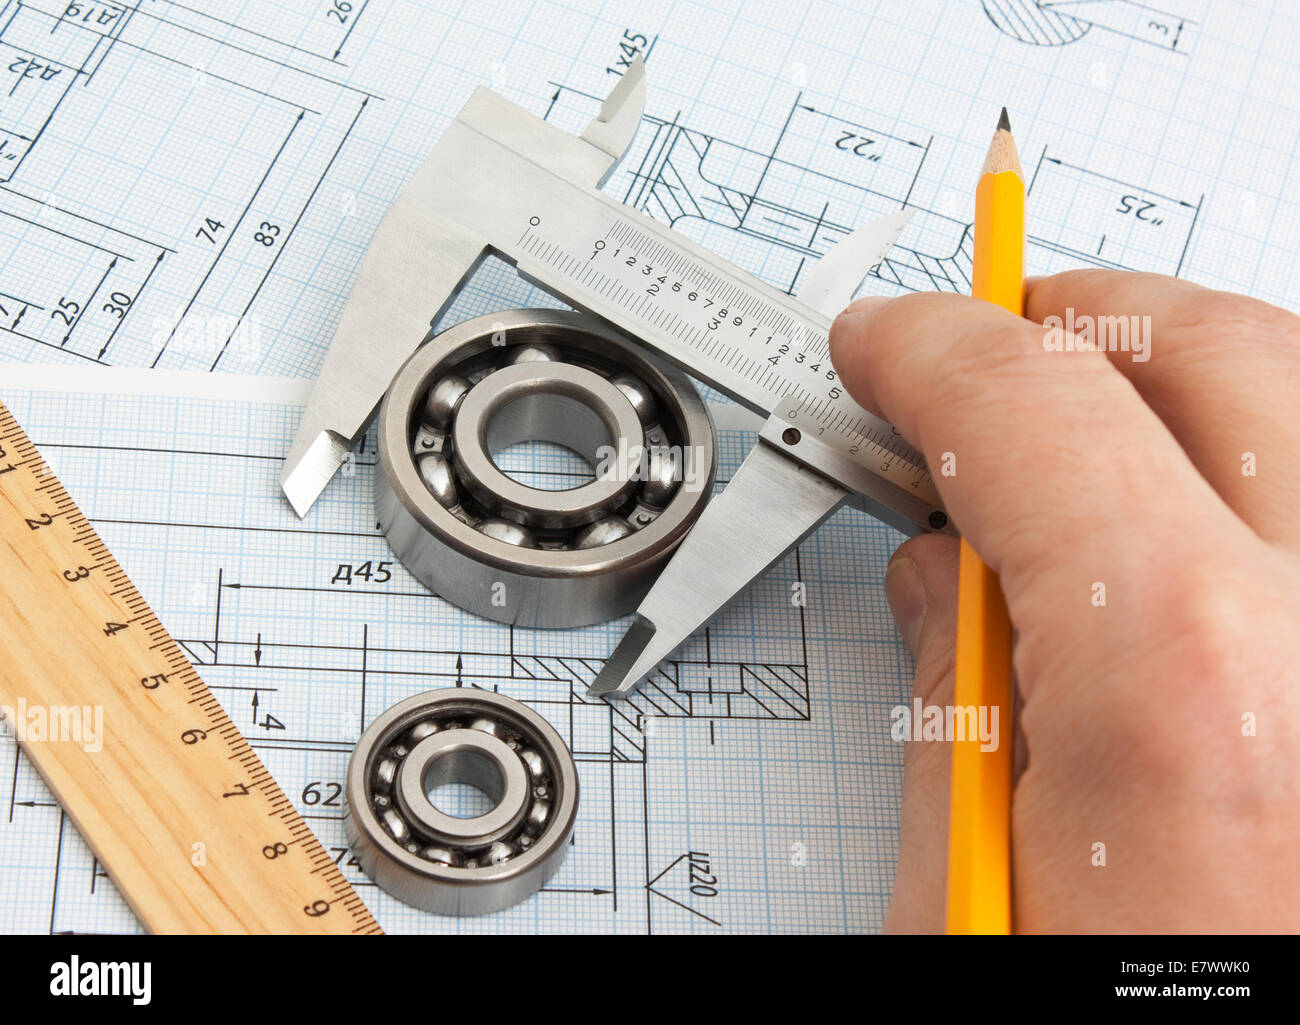 technical drawing and tools in hand Stock Photo